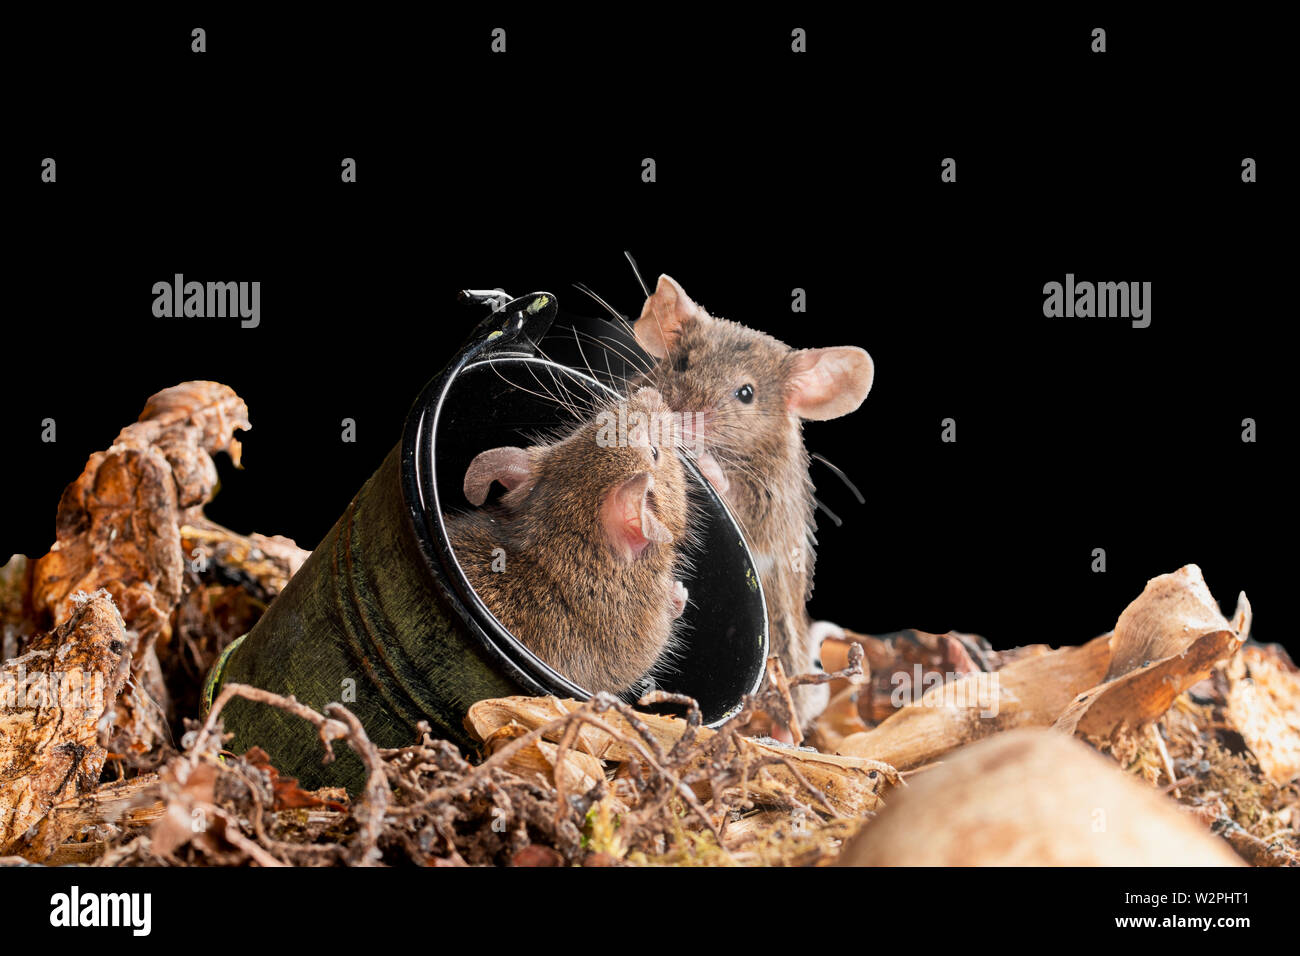 wild brown mice in a studio setting with bucket Stock Photo